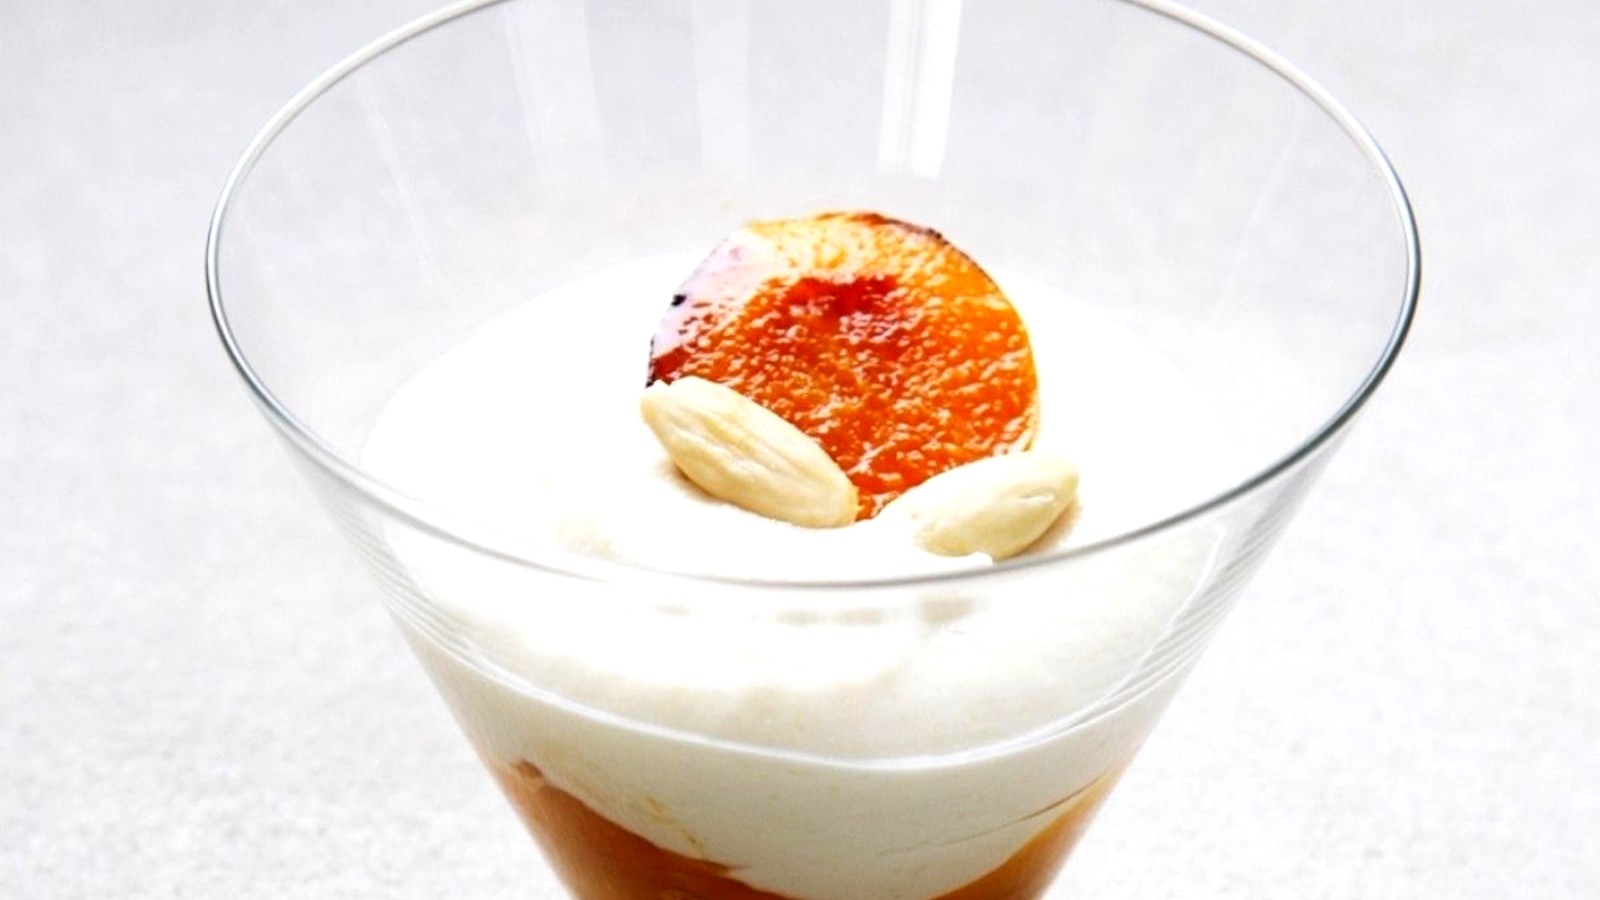 Image of Florian Bellanger's Almond Mousse and Apricot Verrine